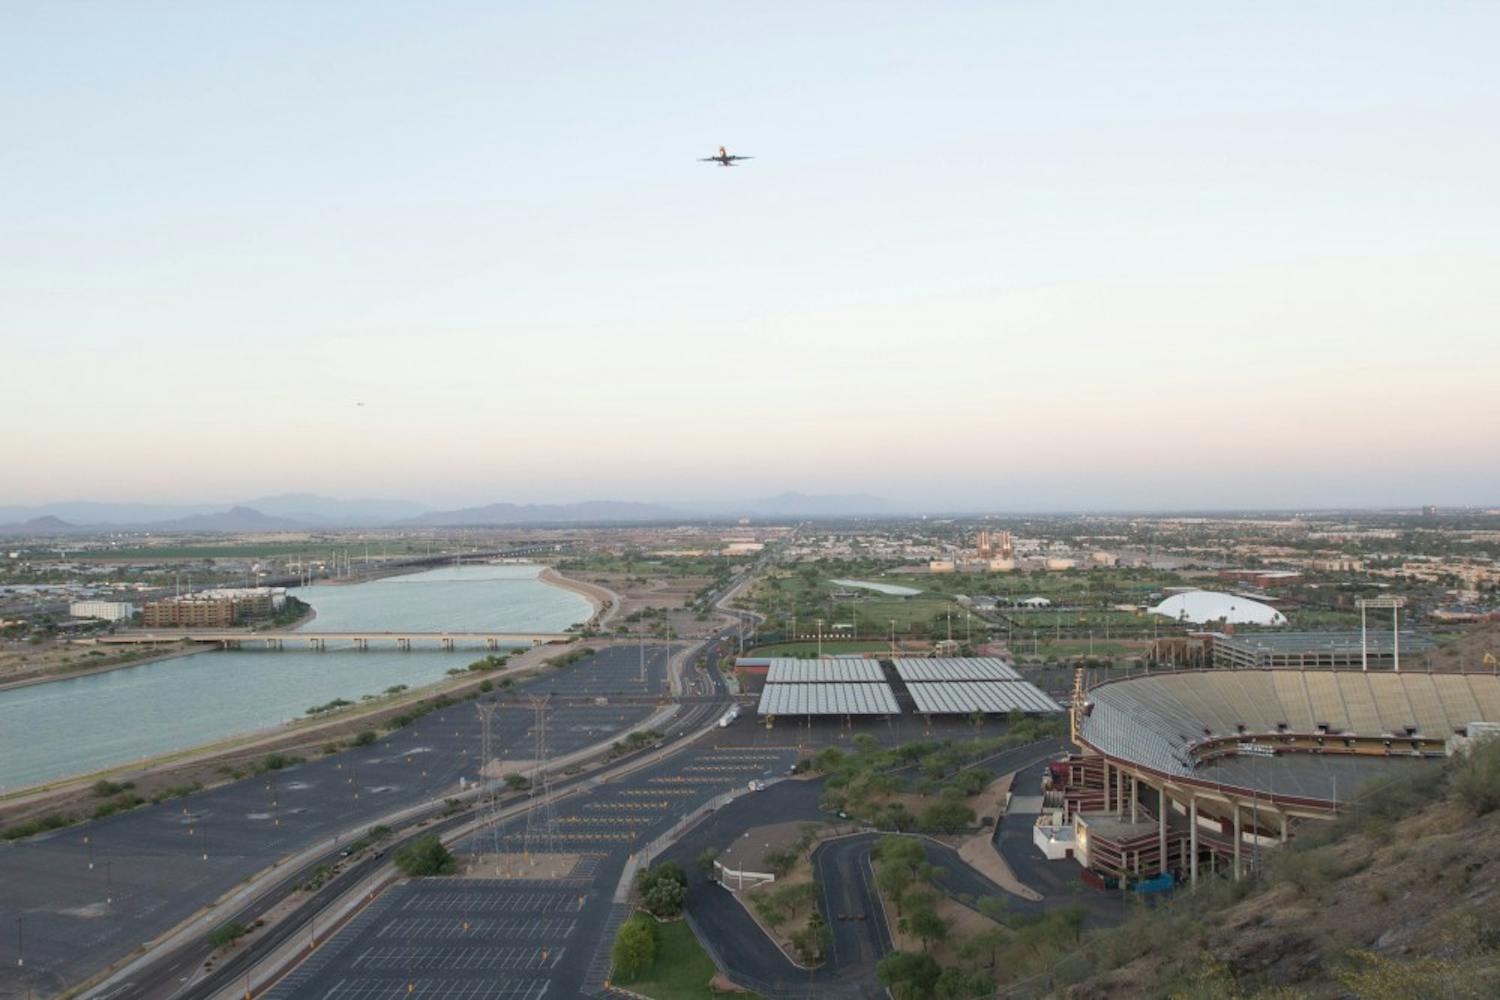 A view of Lot 59 from “A” Mountain. State Farm plans to build their newest headquarters on this parking lot, facing Tempe Town Lake. (photo by Dominic Valente.)